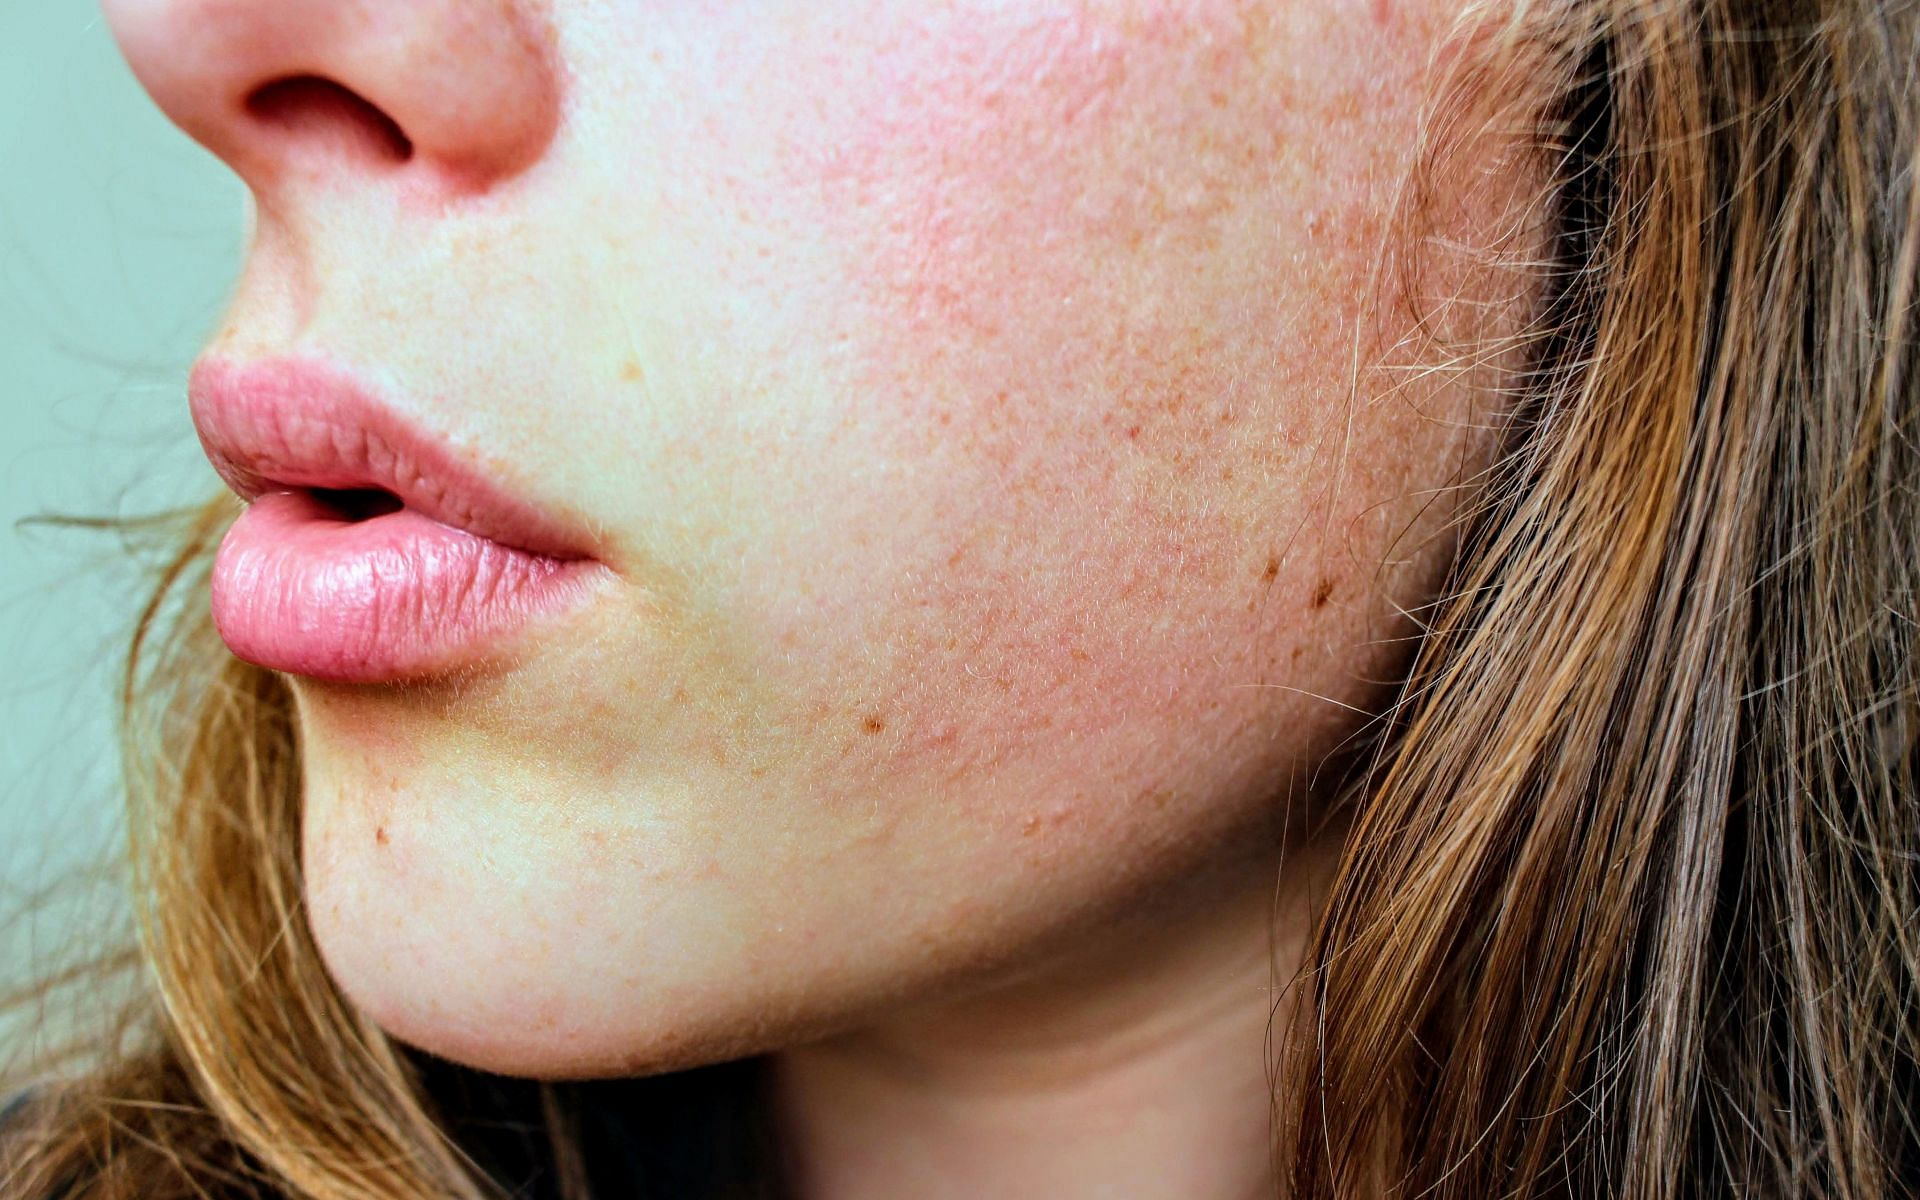 Skin itching may result in redness. (Image via Pexels/Jenna Hamra)